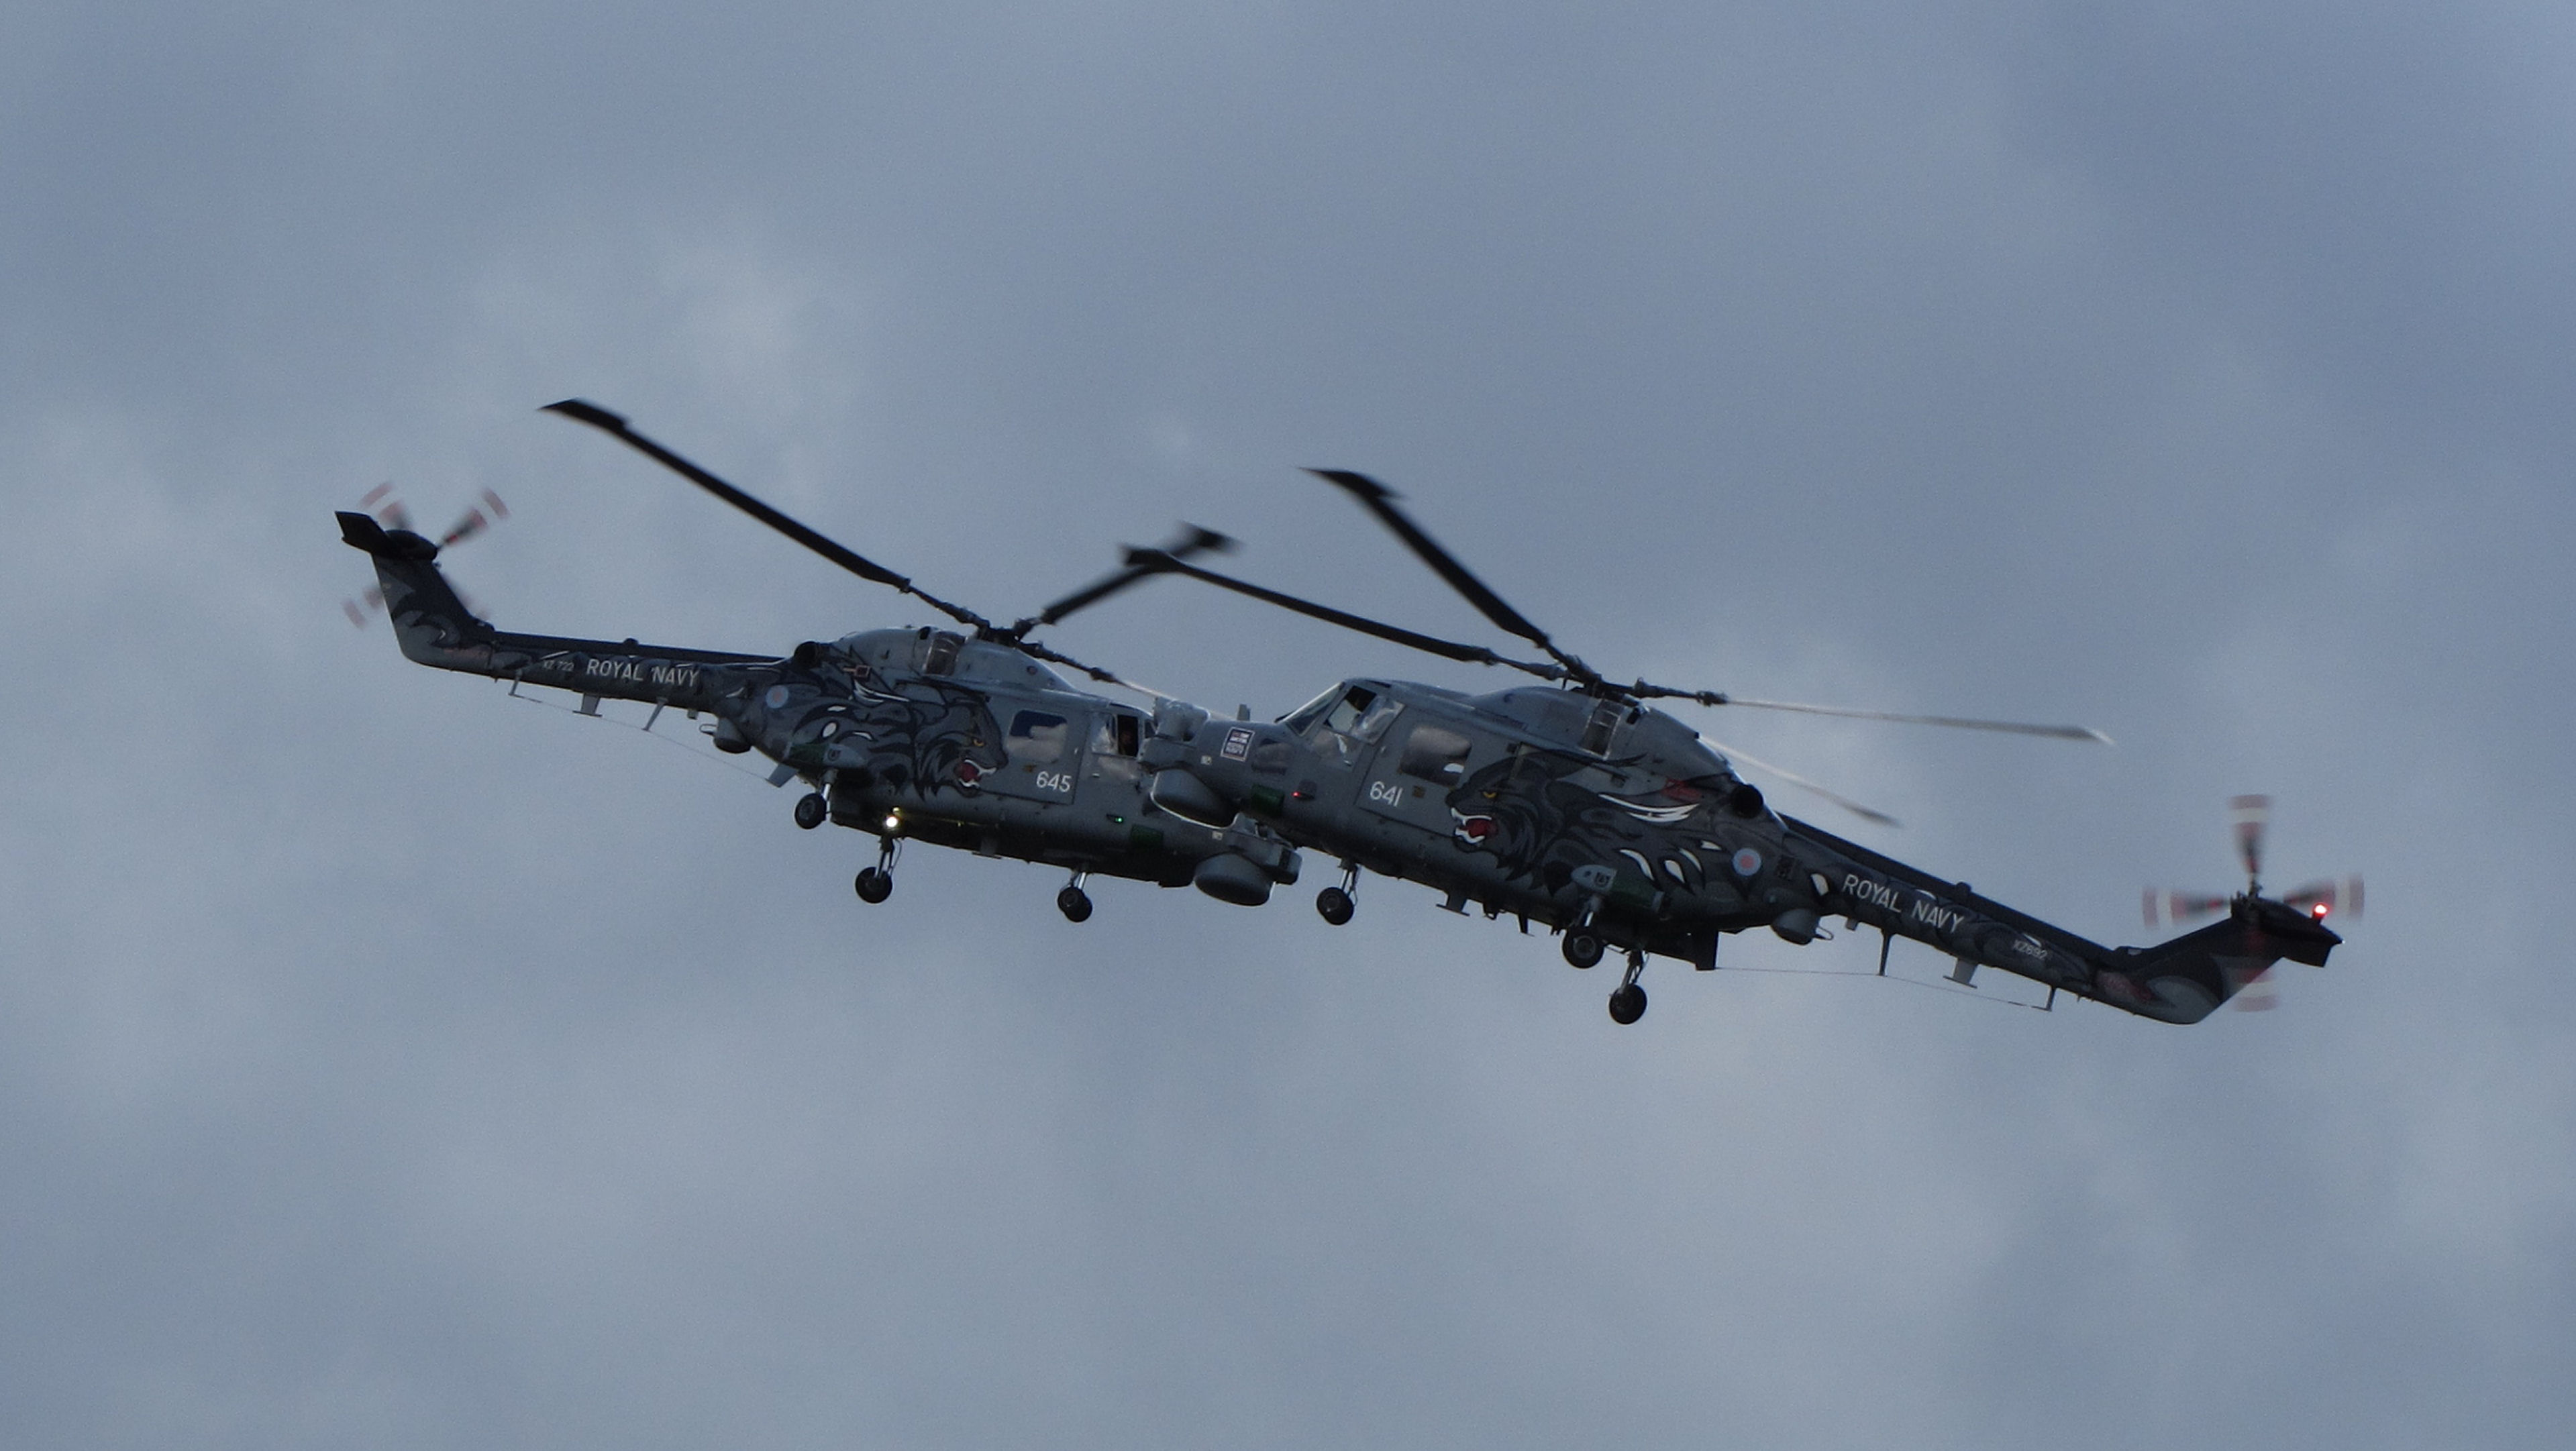 Military helicopter flying in the sky, showcasing the powerful Westland Lynx.